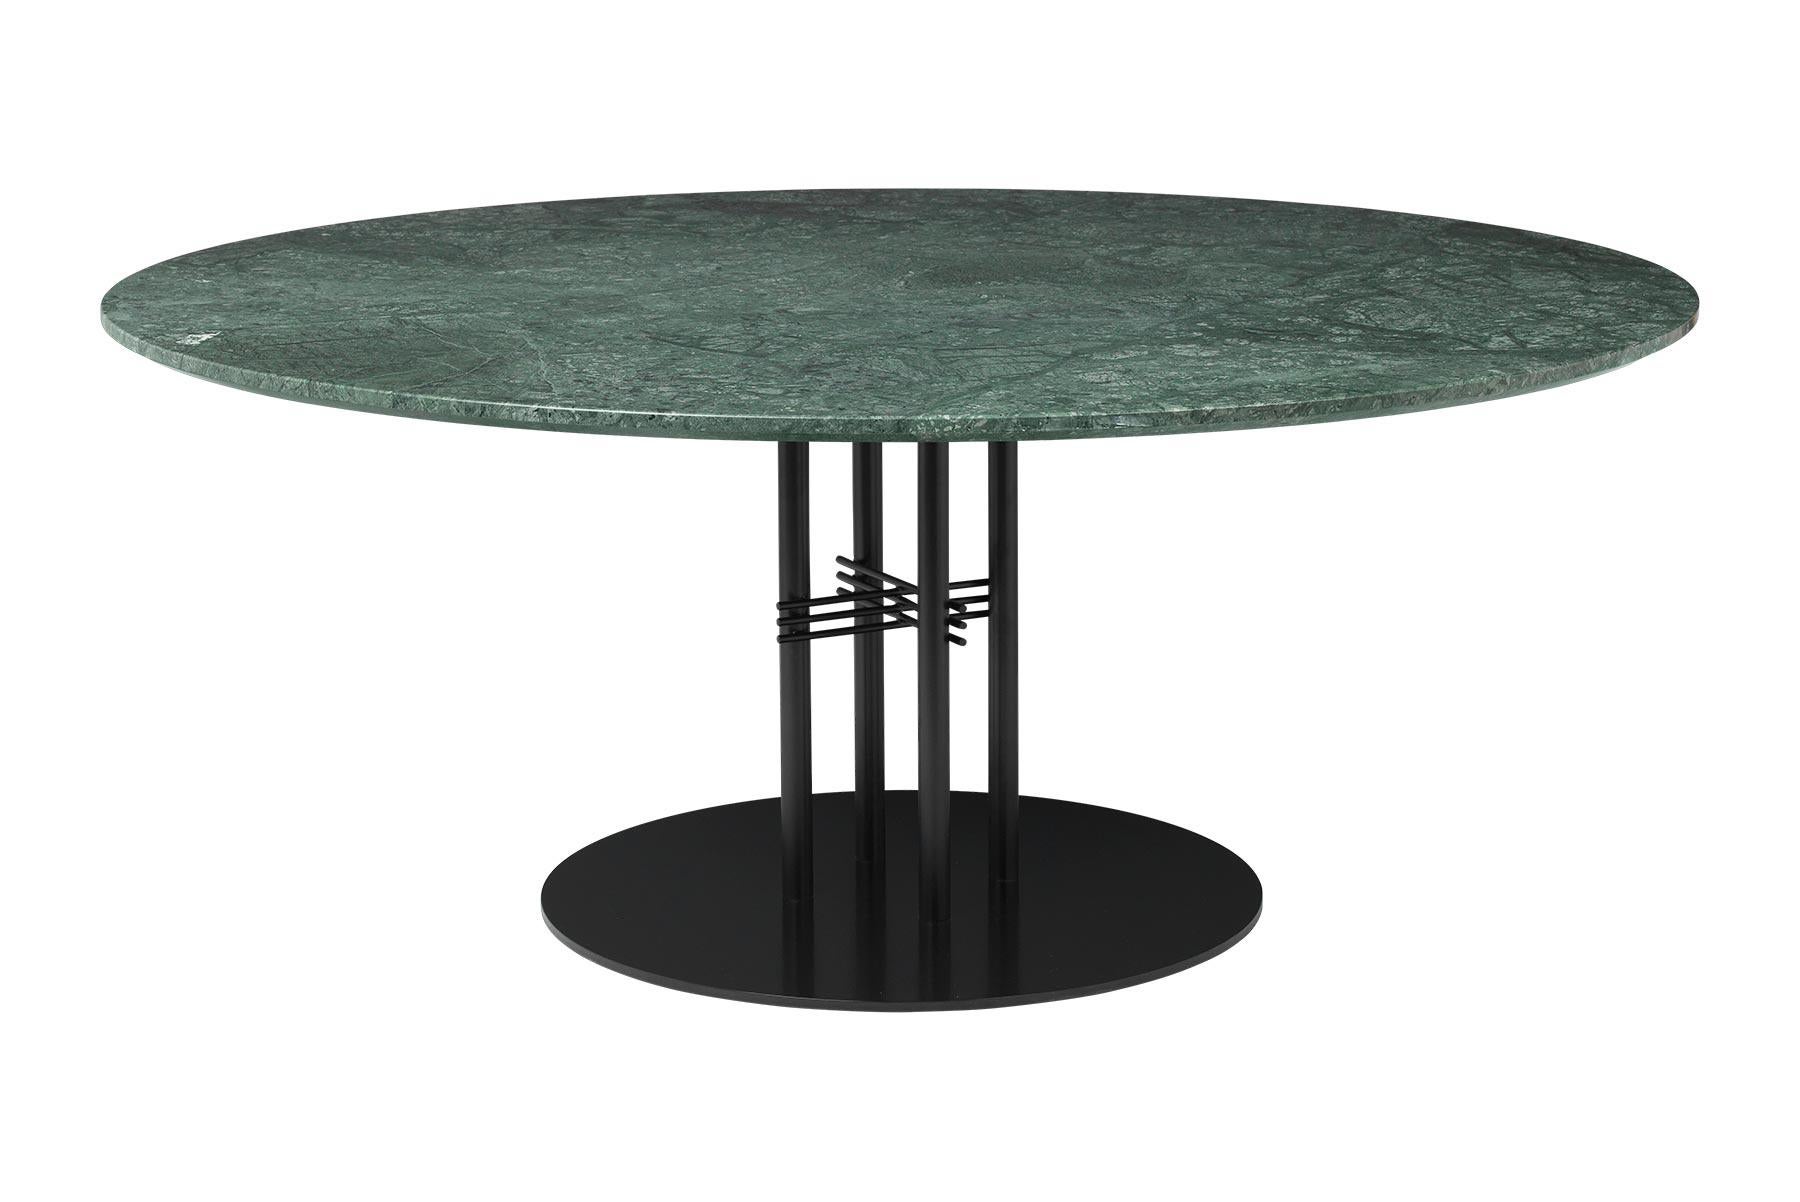 With TS collection, the design duo GamFratesi has proven that a strong design idea can hold a wealth of development possibilities. Gubi is proud to present its latest additions – the TS column bar table, dining table and lounge table.

The TS